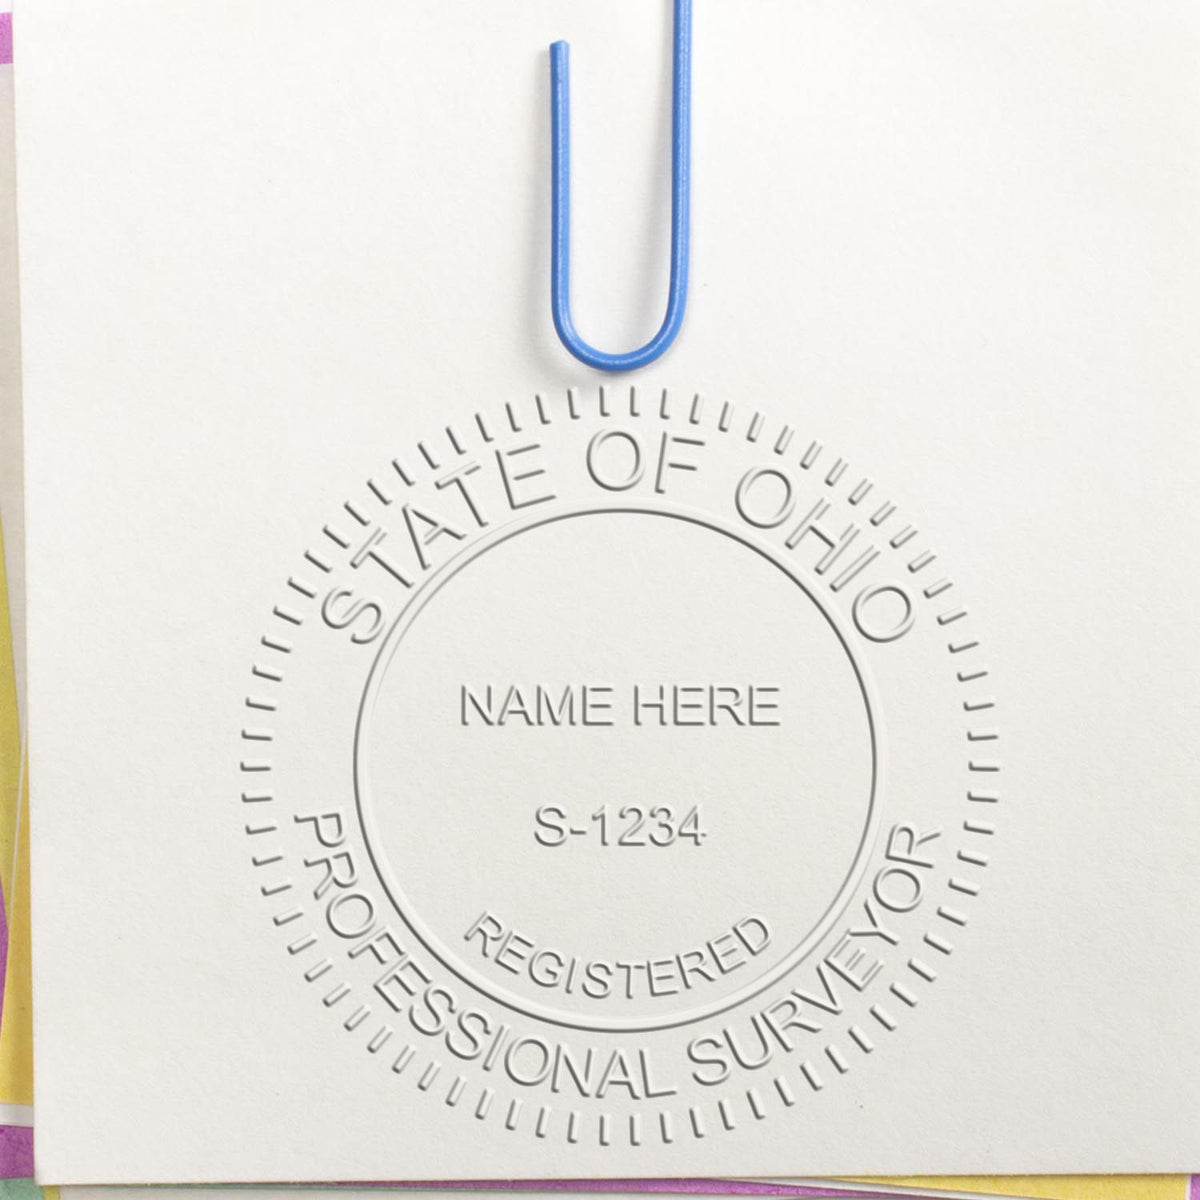 An in use photo of the Hybrid Ohio Land Surveyor Seal showing a sample imprint on a cardstock